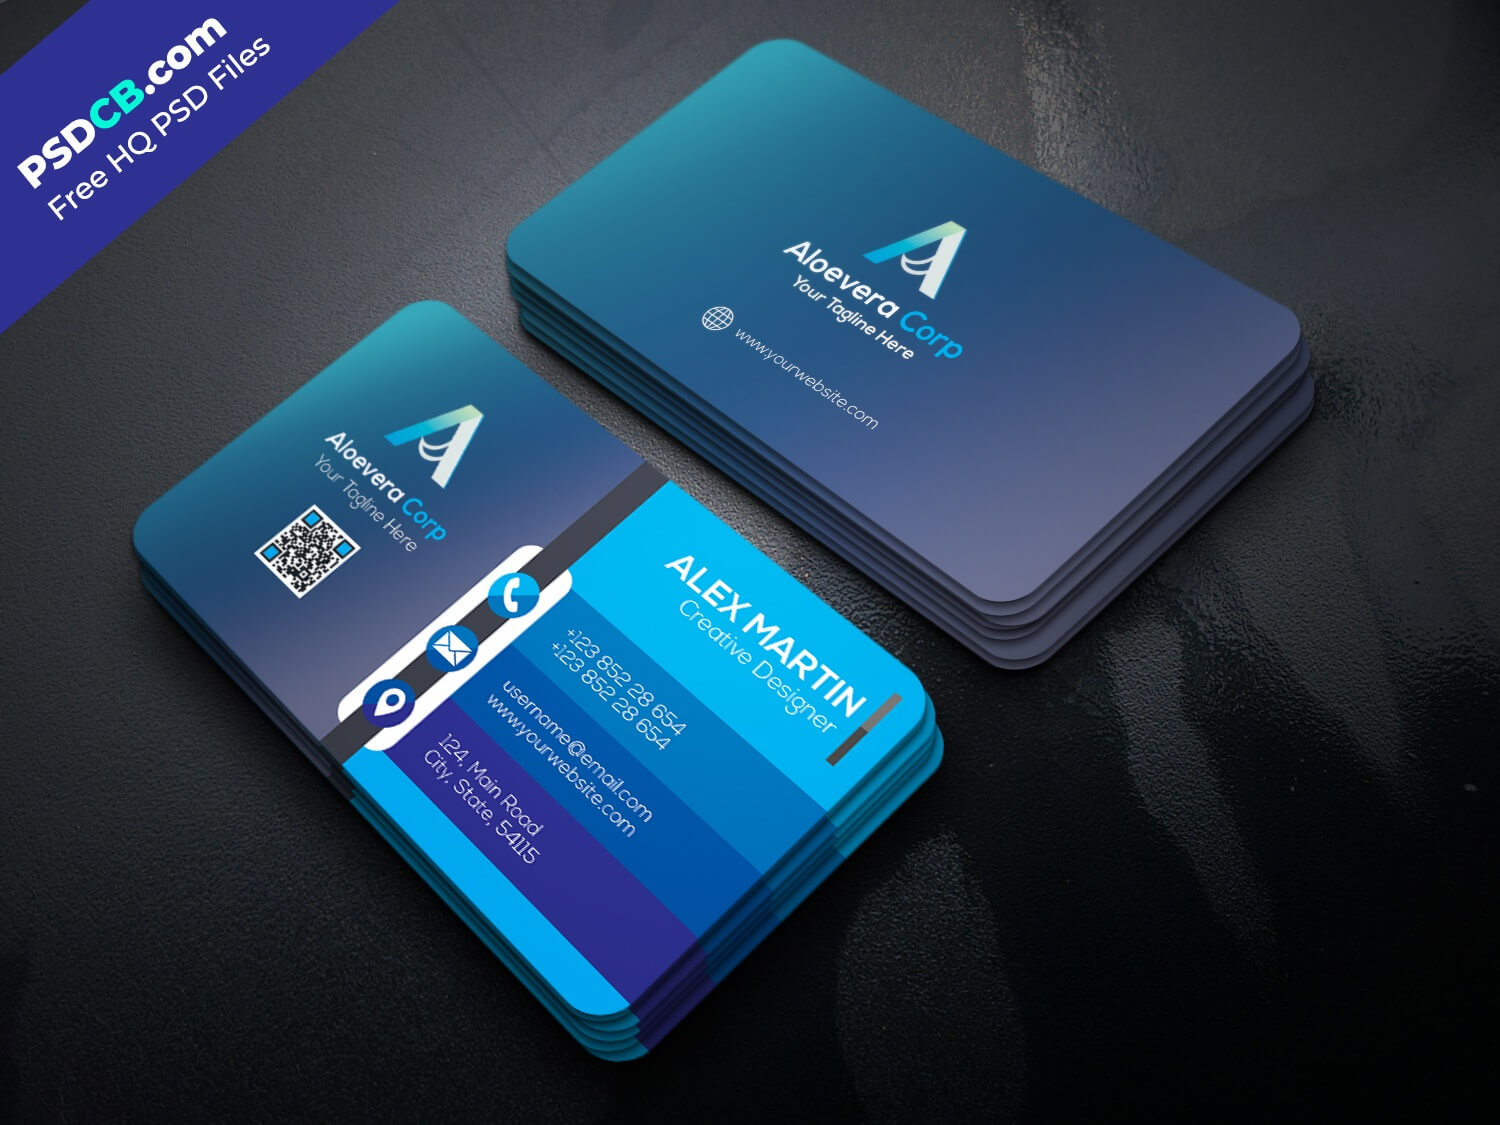 Download Unique Creative Business Card Template Psd Set For Regarding Free Business Card Templates In Psd Format